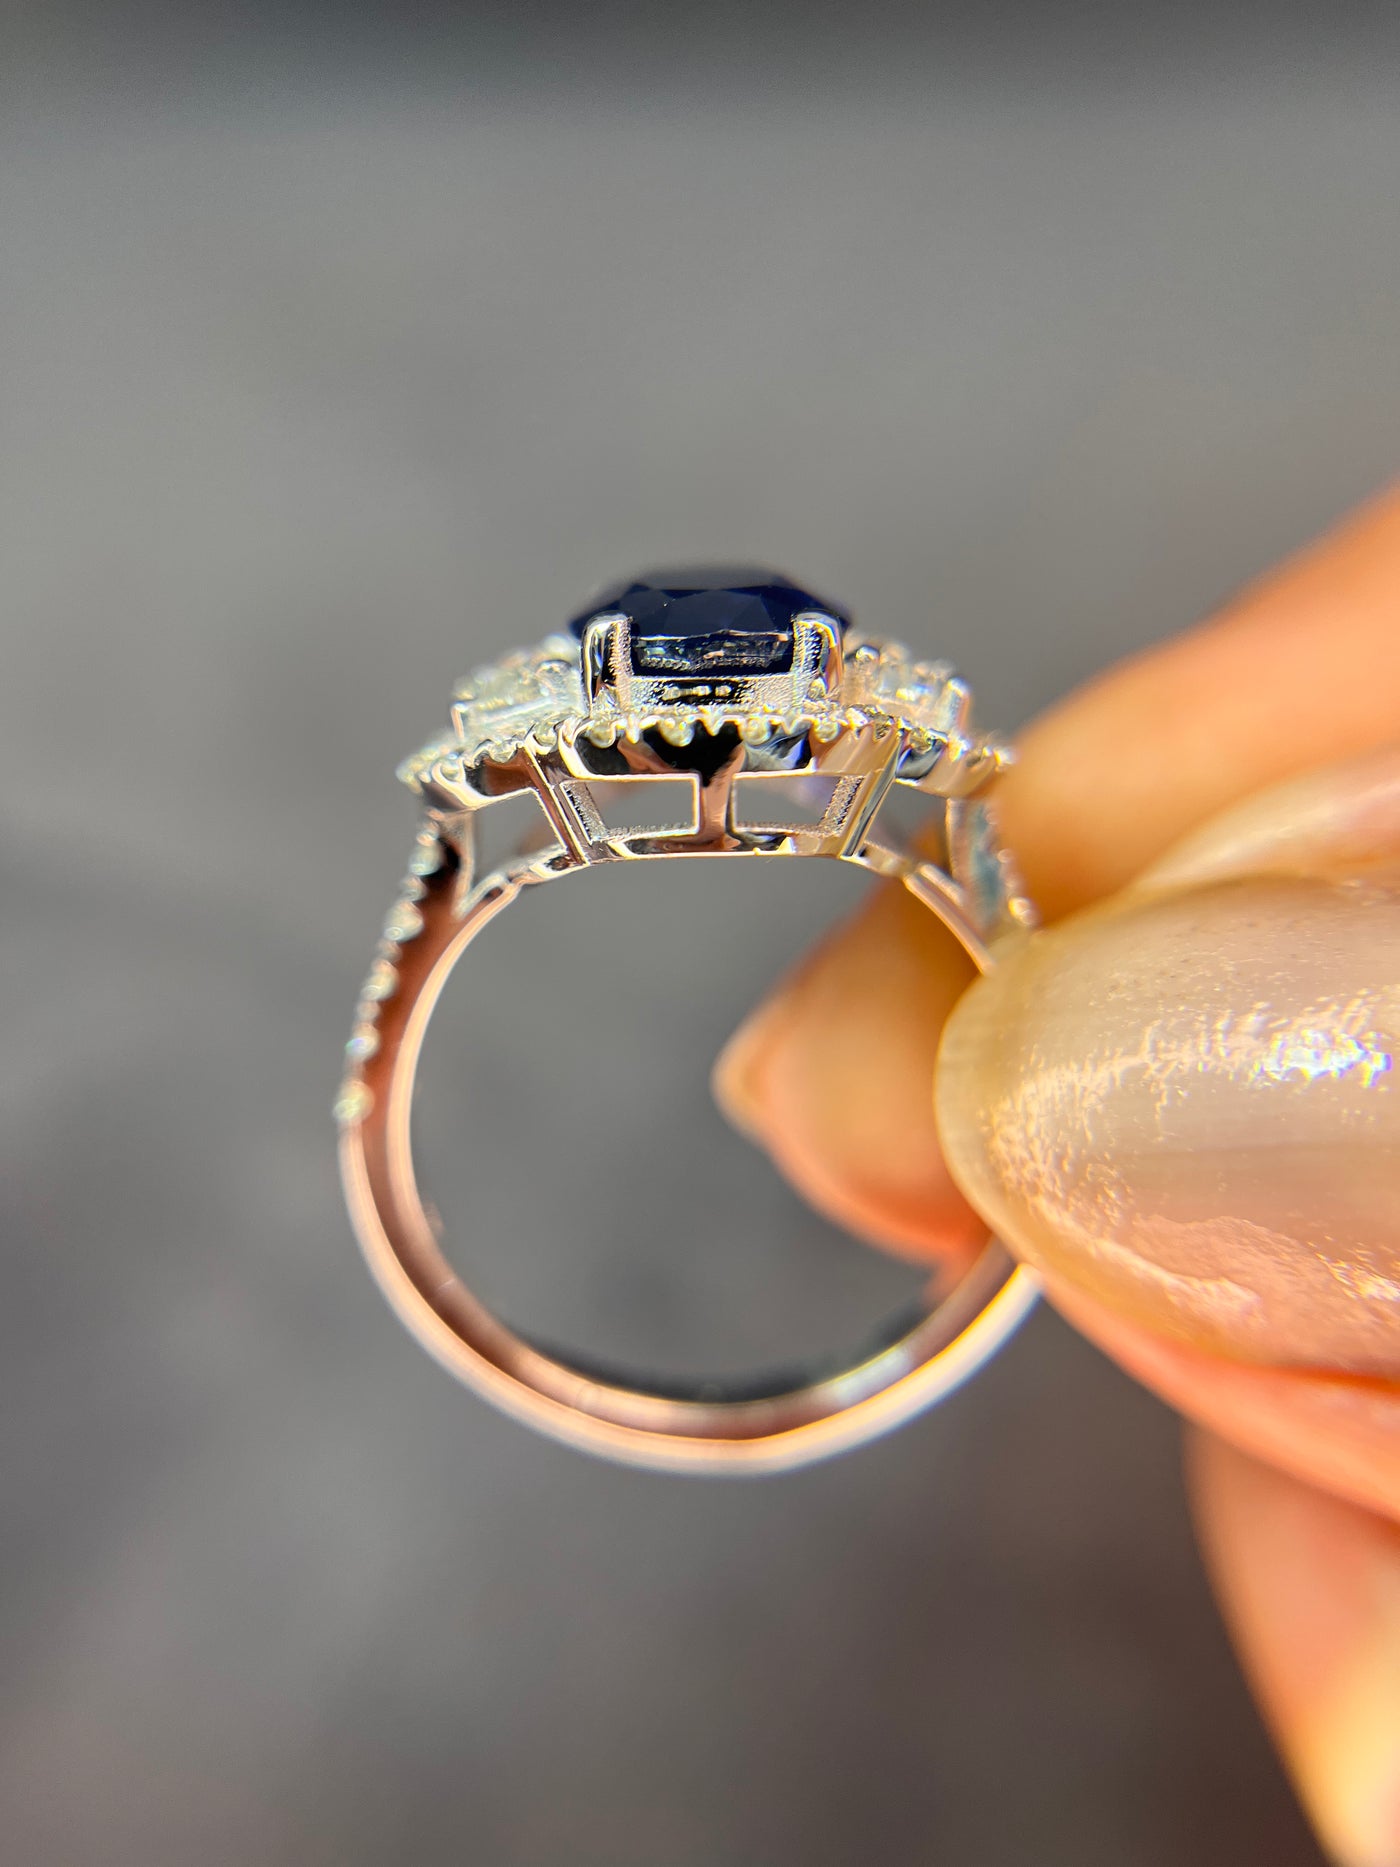 Halo Design 2 Ct. Tw. Oval Cut Natural Blue Sapphire with 1.25 Ct. Tw. Half Moon and Round Cut Side Diamond Ring